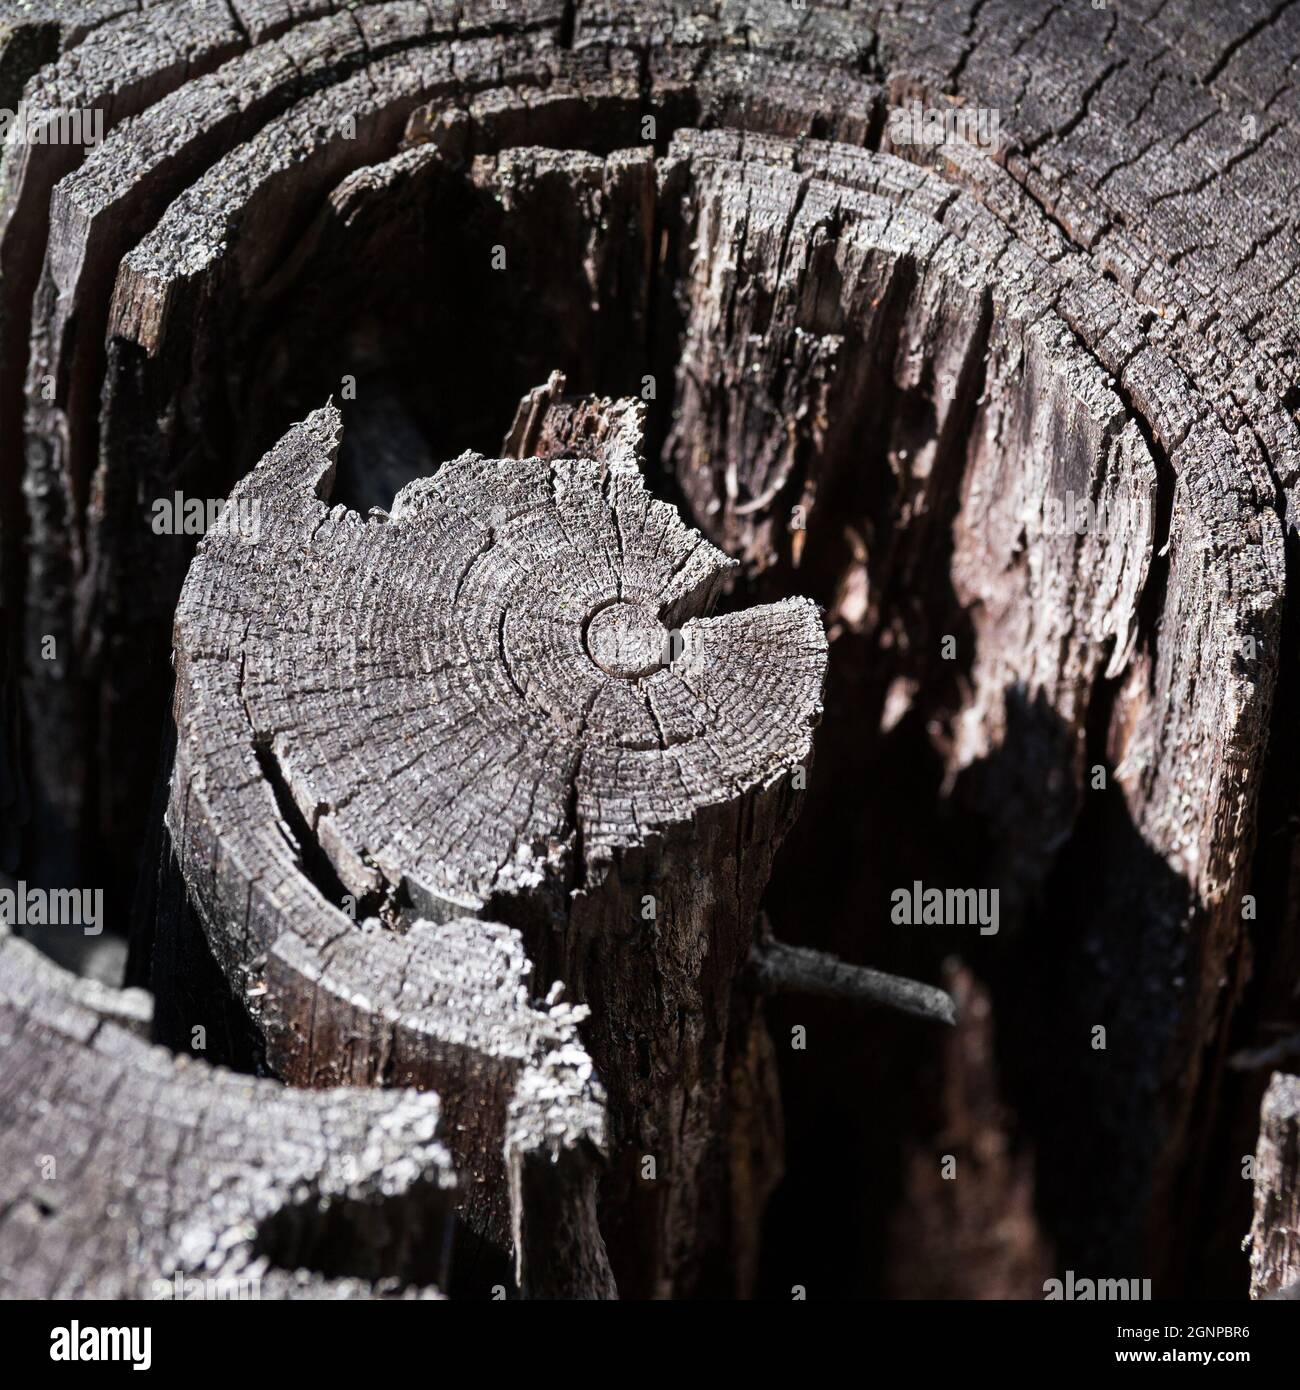 Old tree stump with annual rings close-up, shallow depth of field Stock Photo